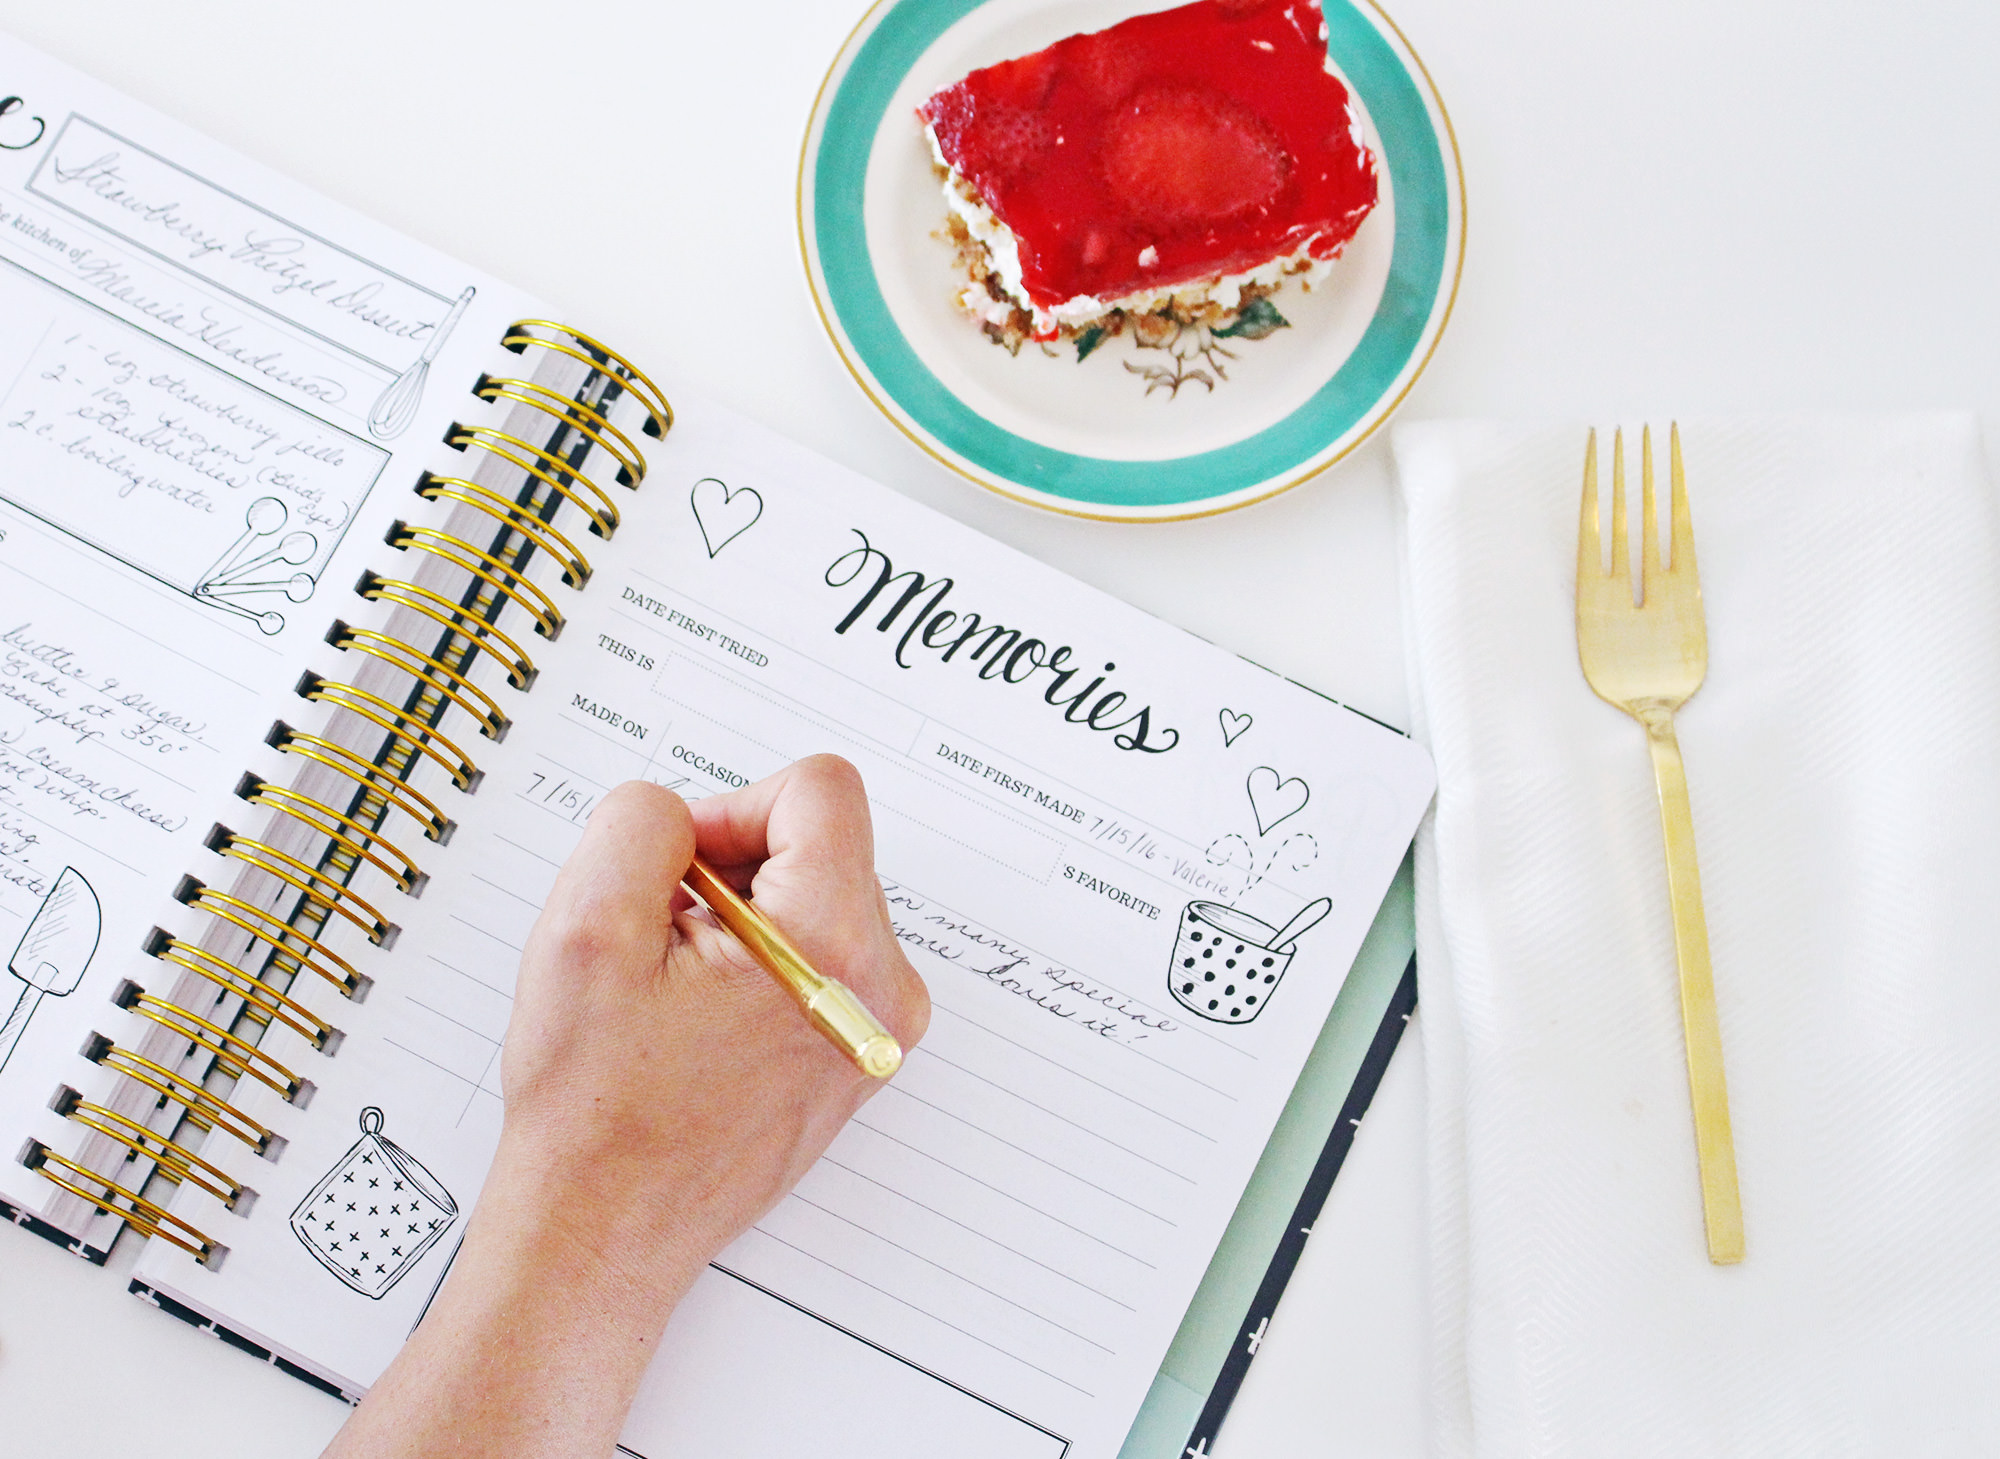 You can record memories on the journaling side of the Keepsake Kitchen Diary.